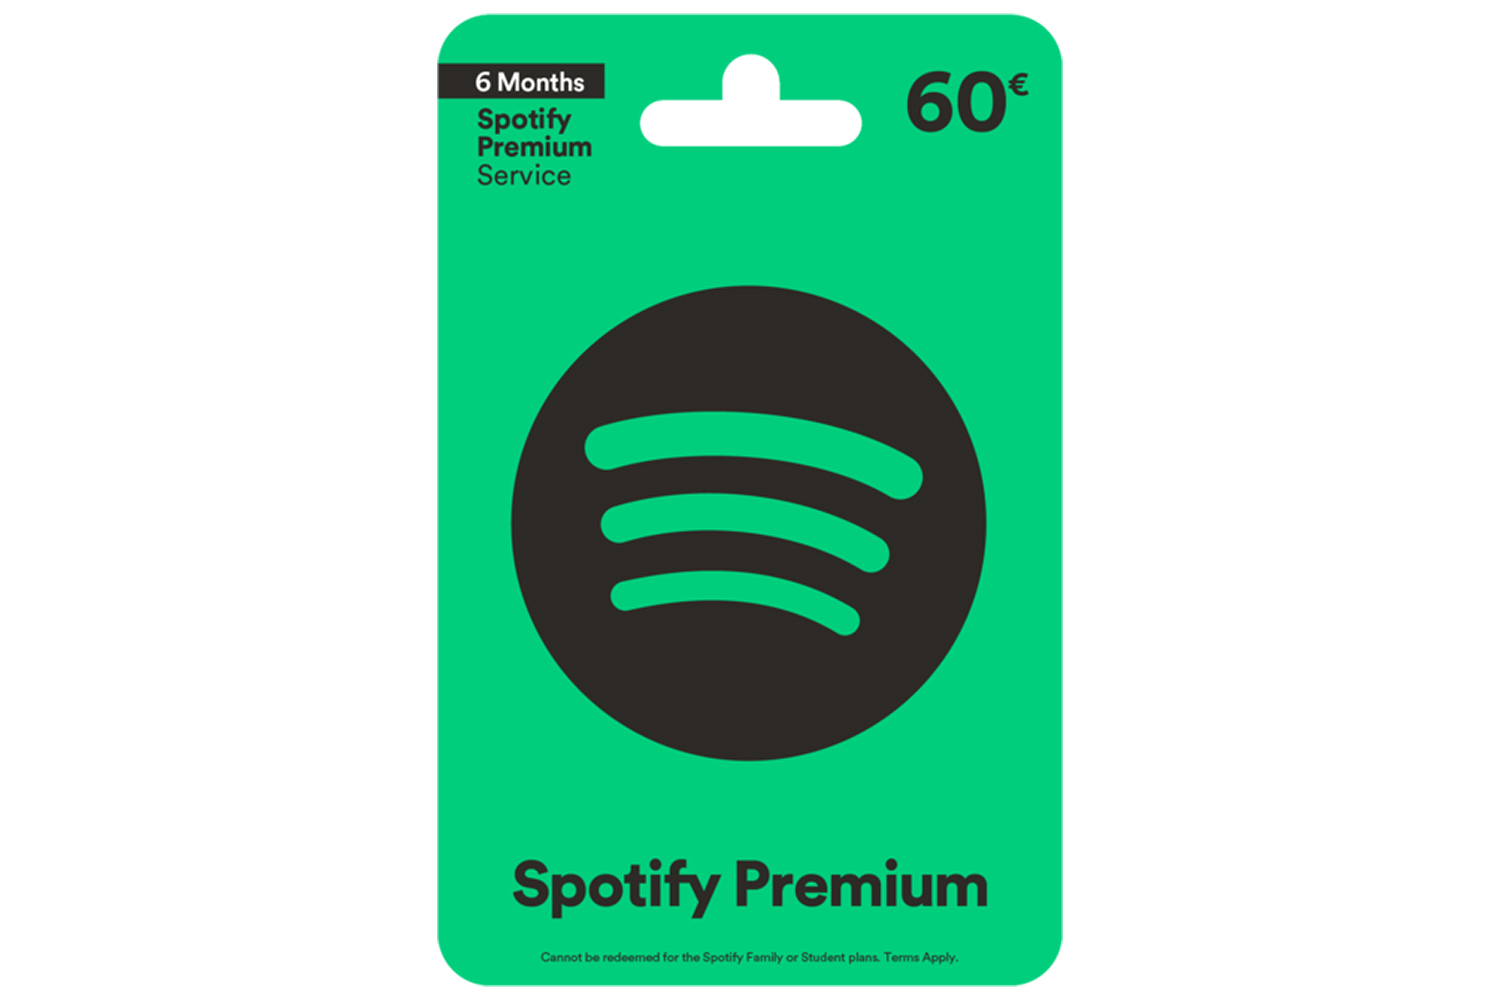 spotify premium cost monthly